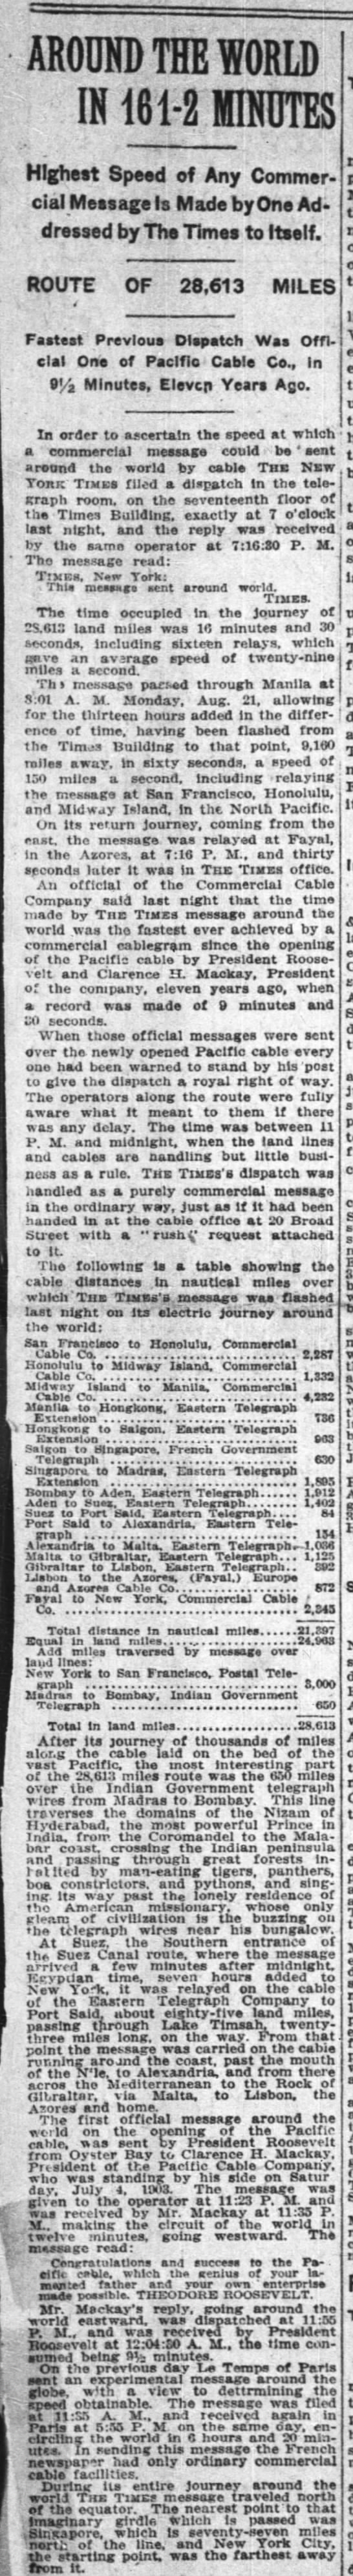 First around-the-world commercial telegram is sent, 1911 - 